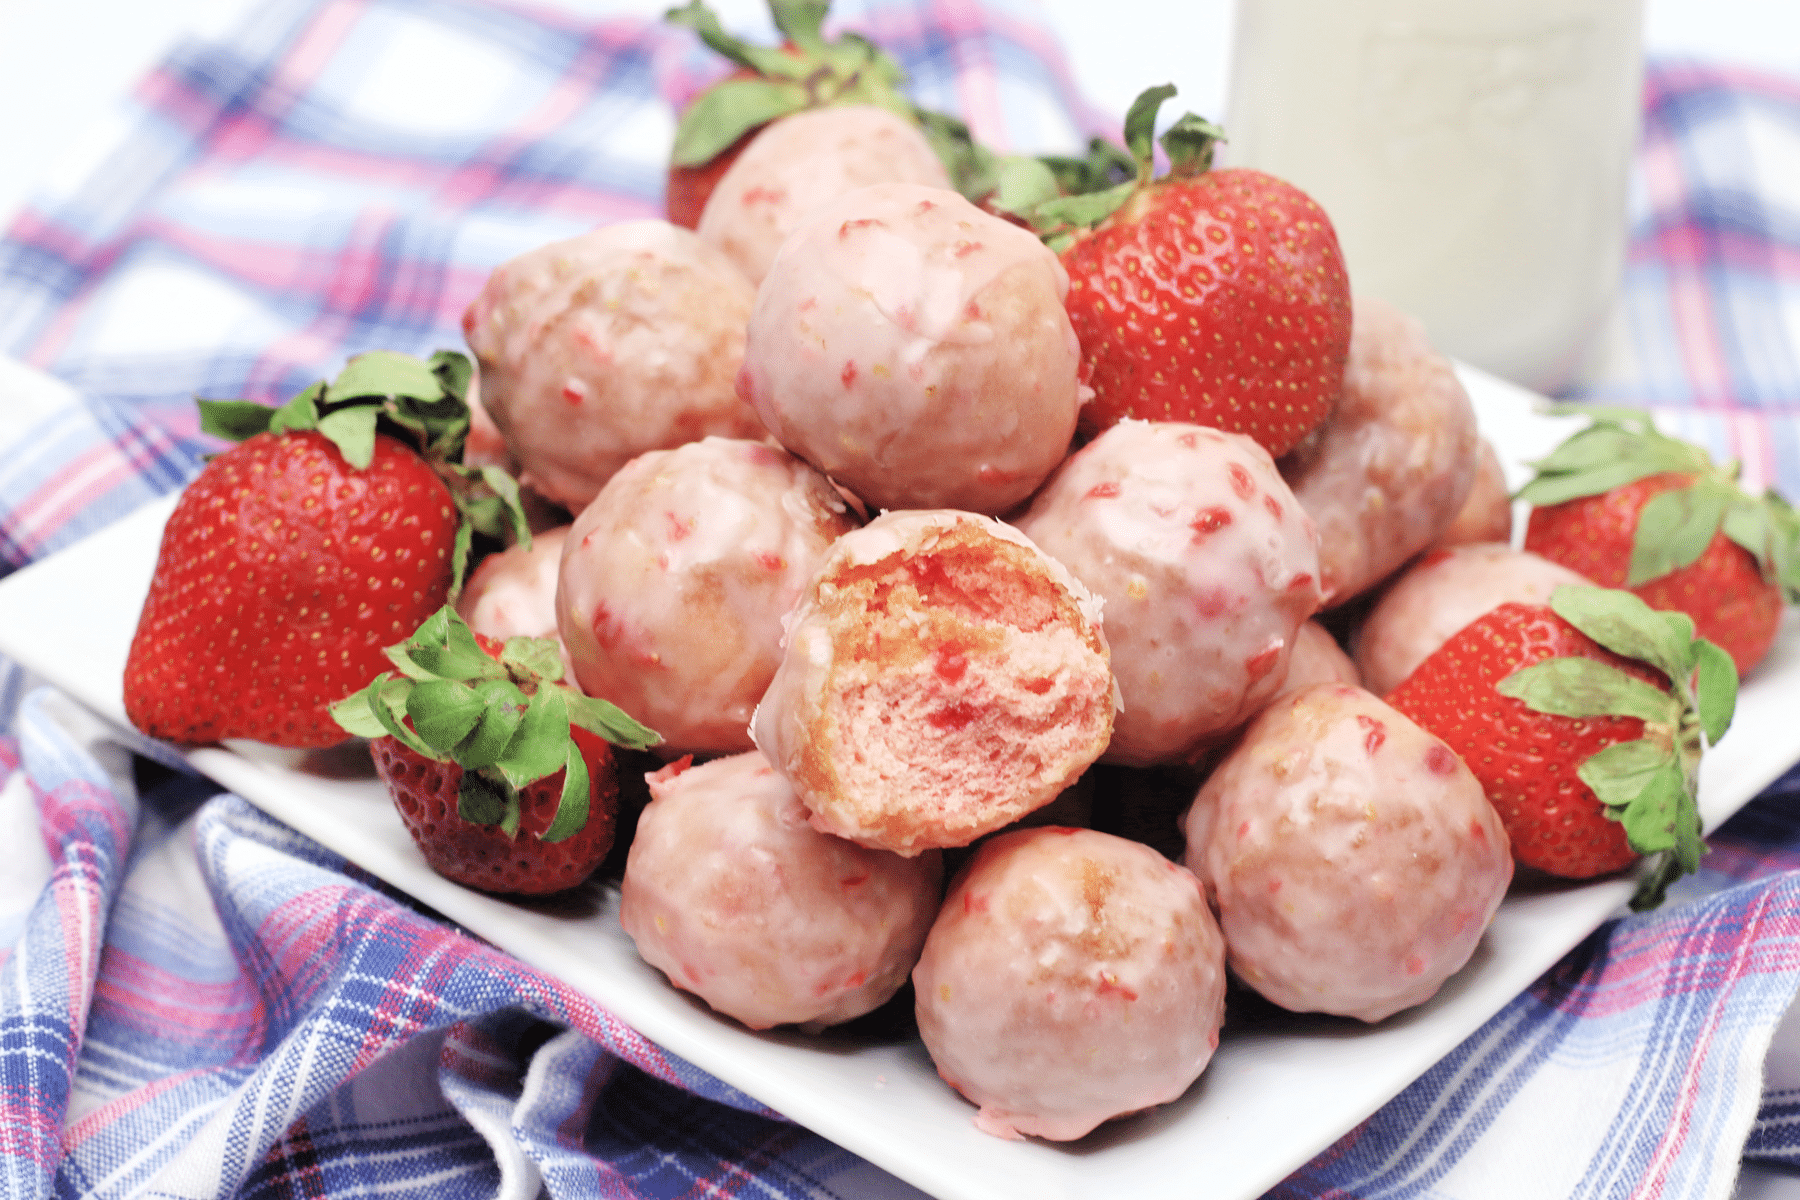 A serving of Strawberry Donut Holes with strawberries